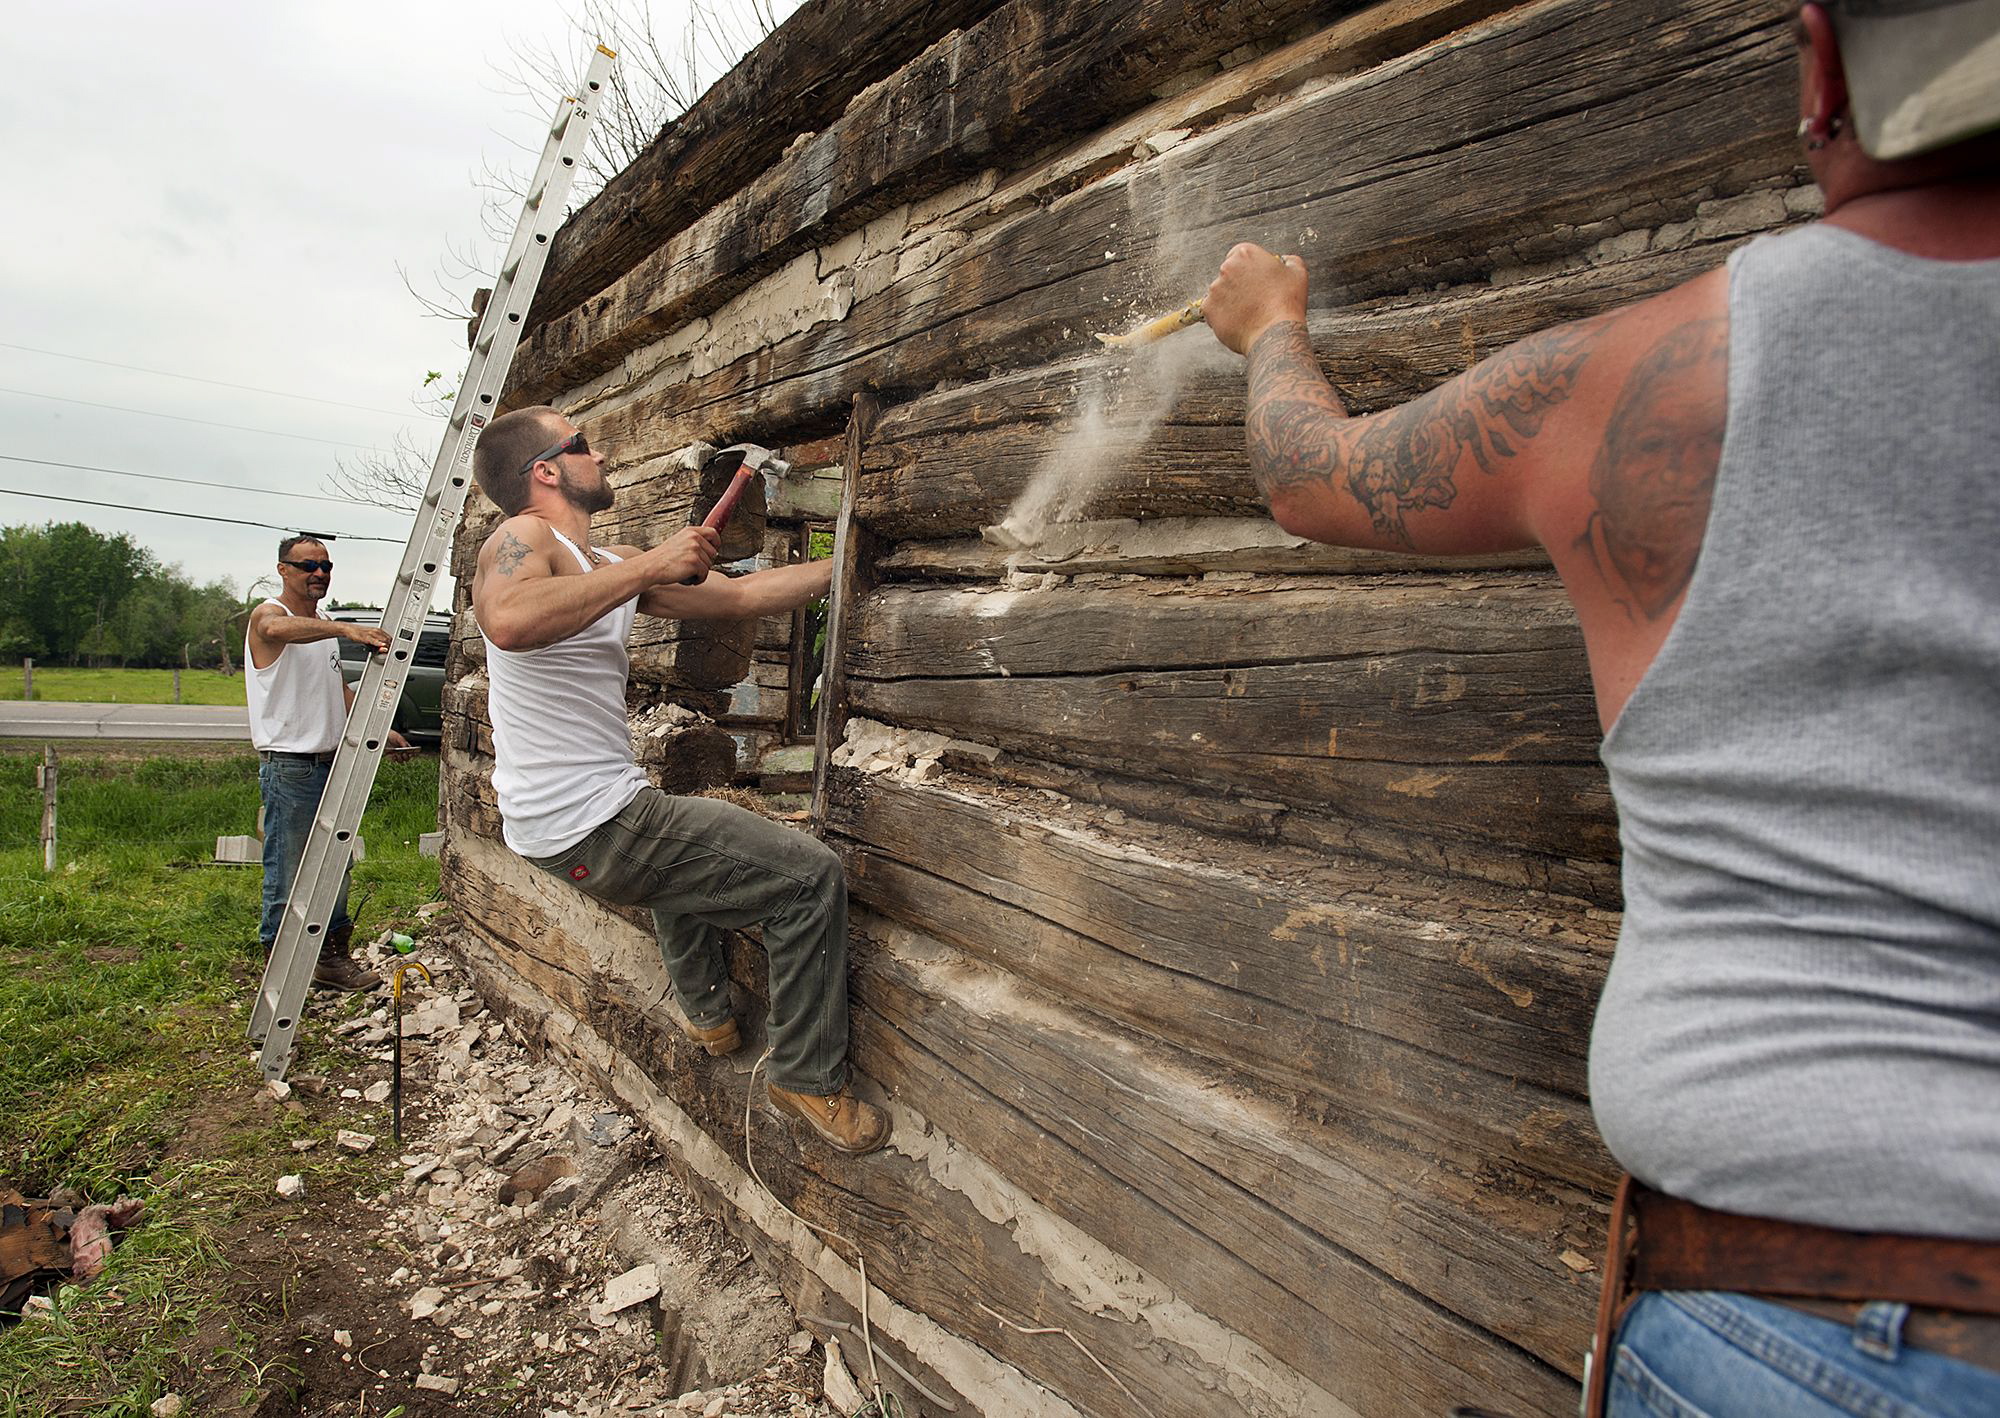 PHOTO: Jesse D. Martin, Madrid, and employee for D.D. Construction, clings to the side of a historic log cabin Wednesday that he and other coworkers were dismantling along route 68 in Lisbon.